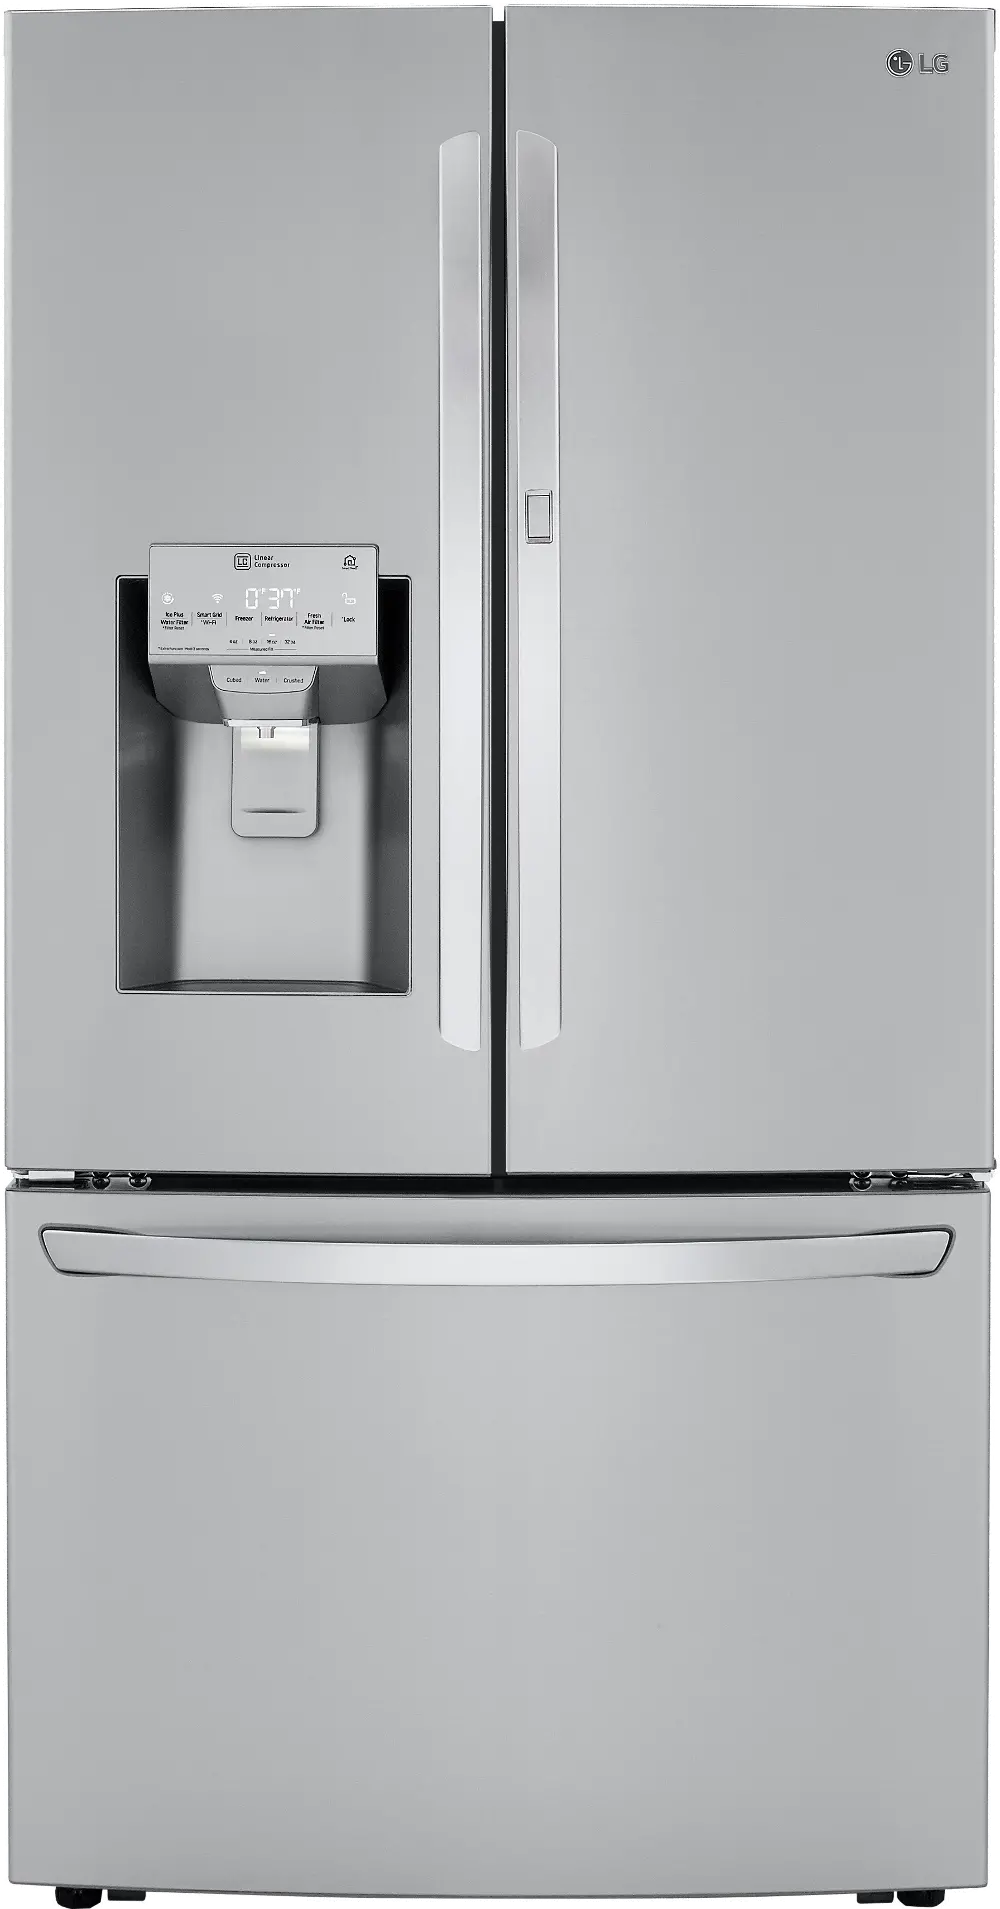 LRFDS3016S LG 29.7 cu ft French Door Refrigerator - Stainless Steel-1